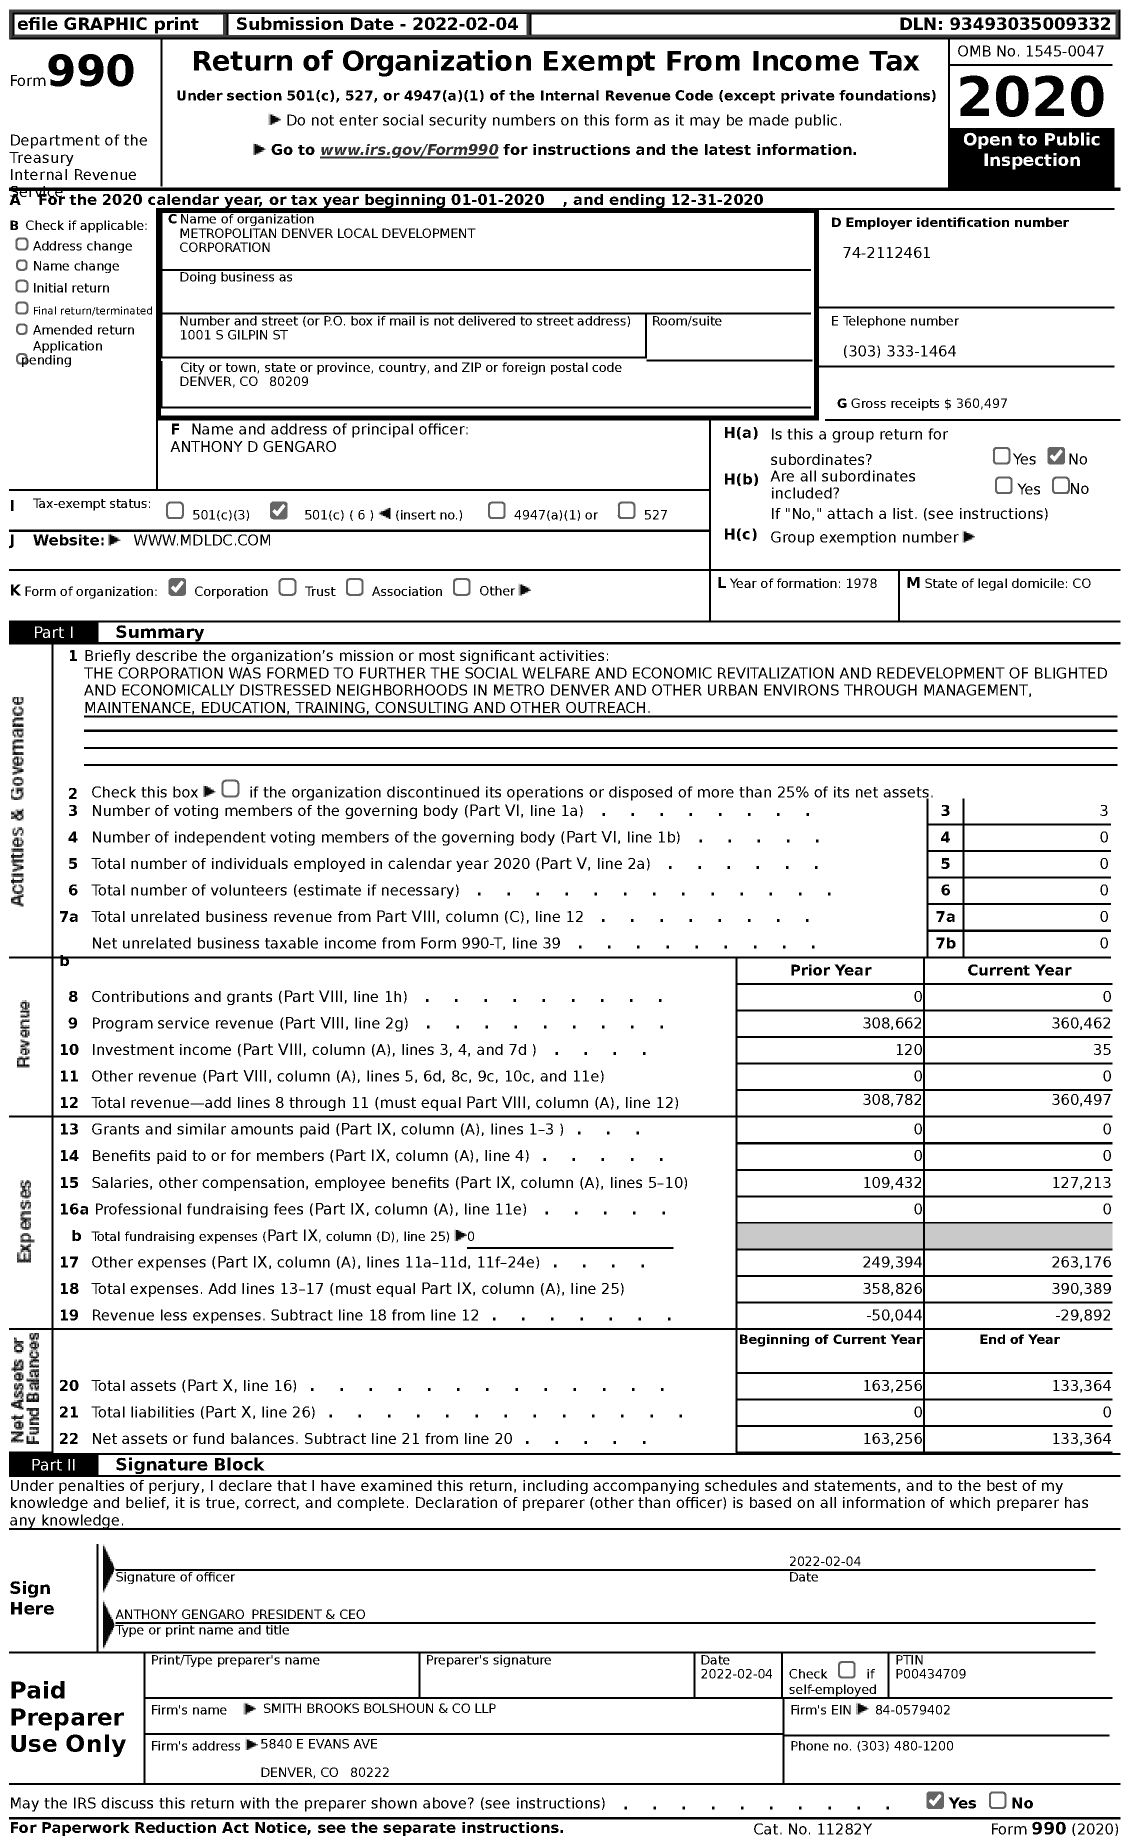 Image of first page of 2020 Form 990 for Metropolitan Denver Local Development Corporation